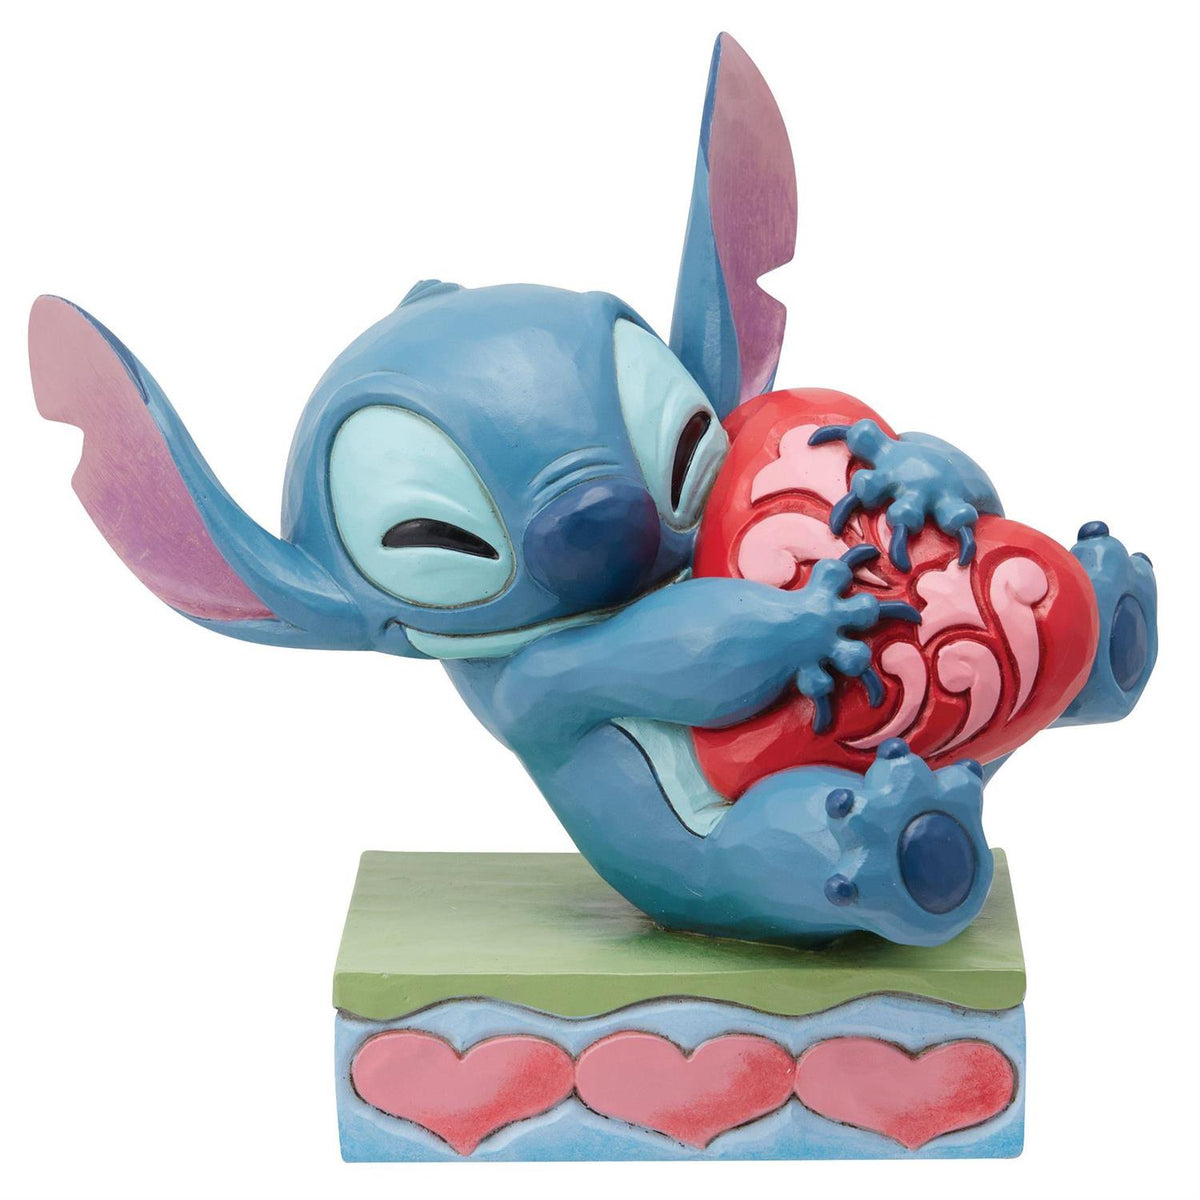 Jim Shore Lilo and Stitch An Alien Hatched! Easter Egg Figurine